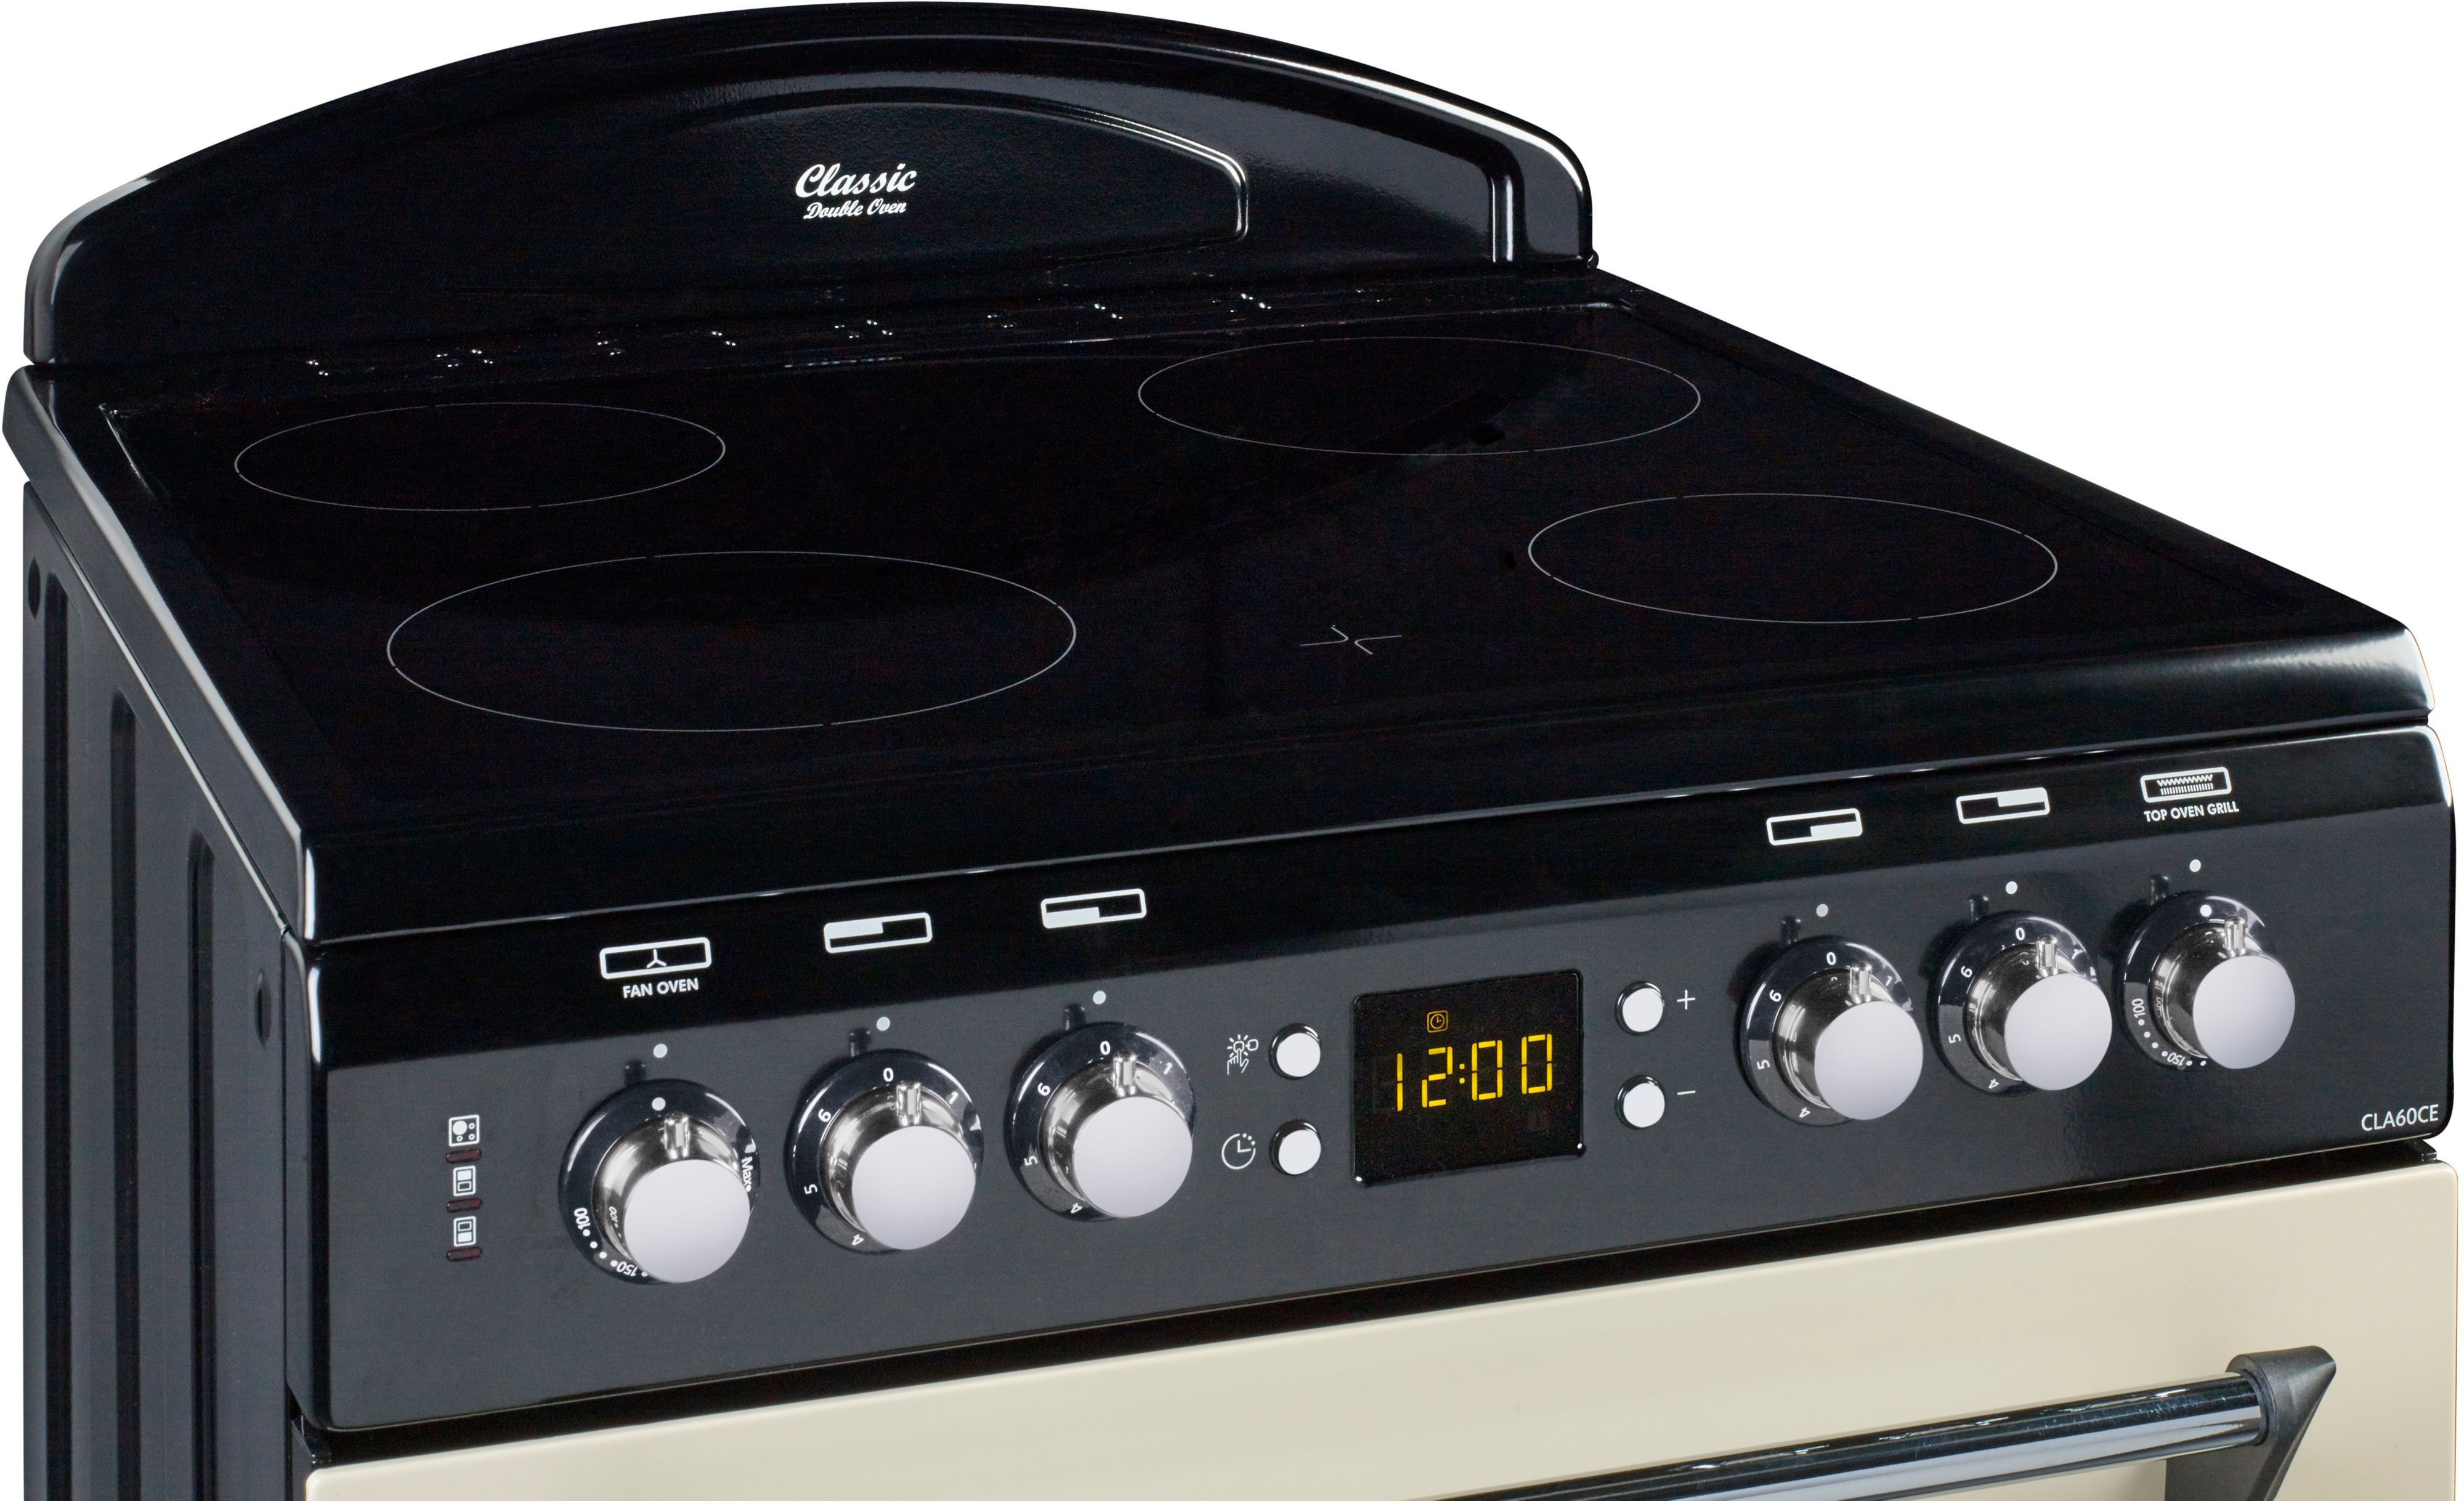 Leisure Cookmaster CLA60CEC 60cm Double Electric Cooker with Ceramic Hob - Cream